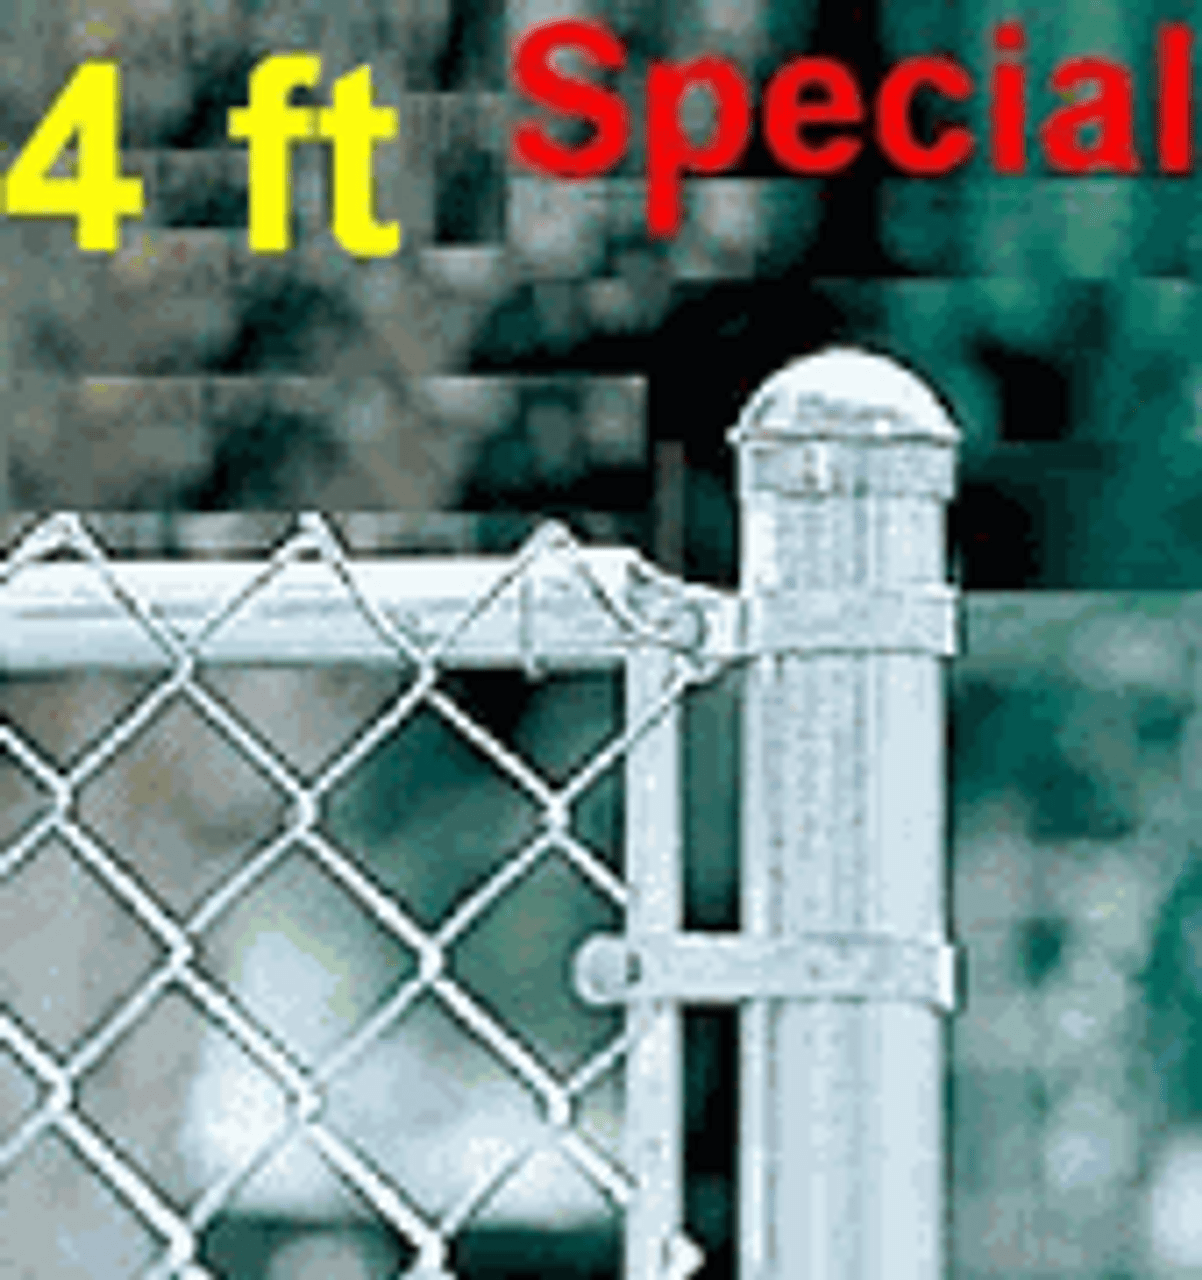 4 ft tall Galvanized Fence Complete Package. The price per ft. Includes: All Top Rail (1-5/8"), All Mesh (2-1/4"x 11-1/2 ga) or 2"x 9ga Price is per linear foot. Line, Corner, End and Gate posts are not included.